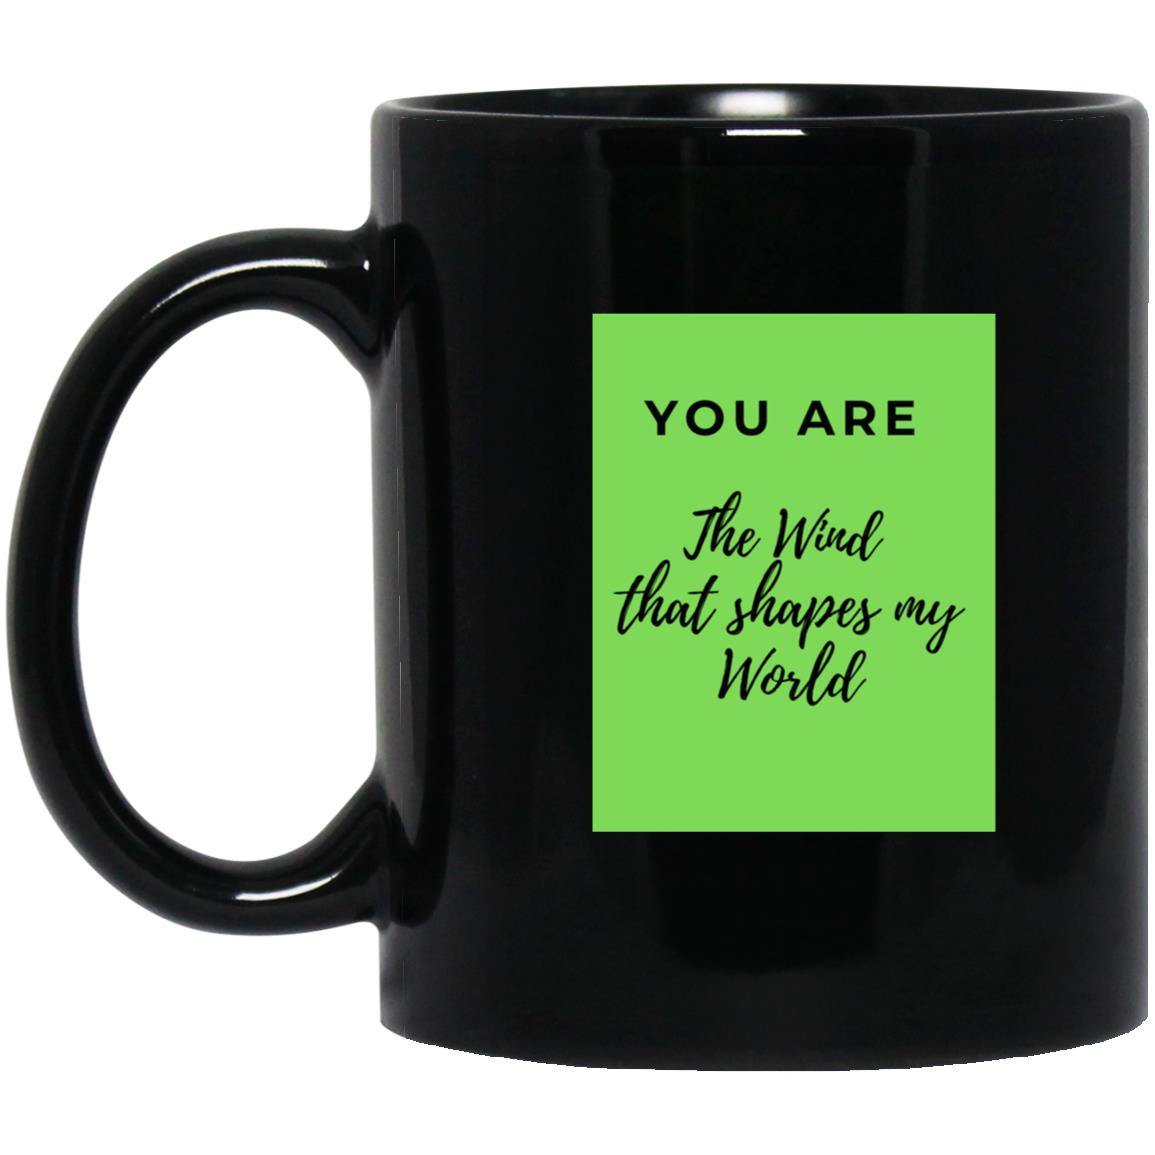 You are the Wind that shapes my world  Mugs - Group 5